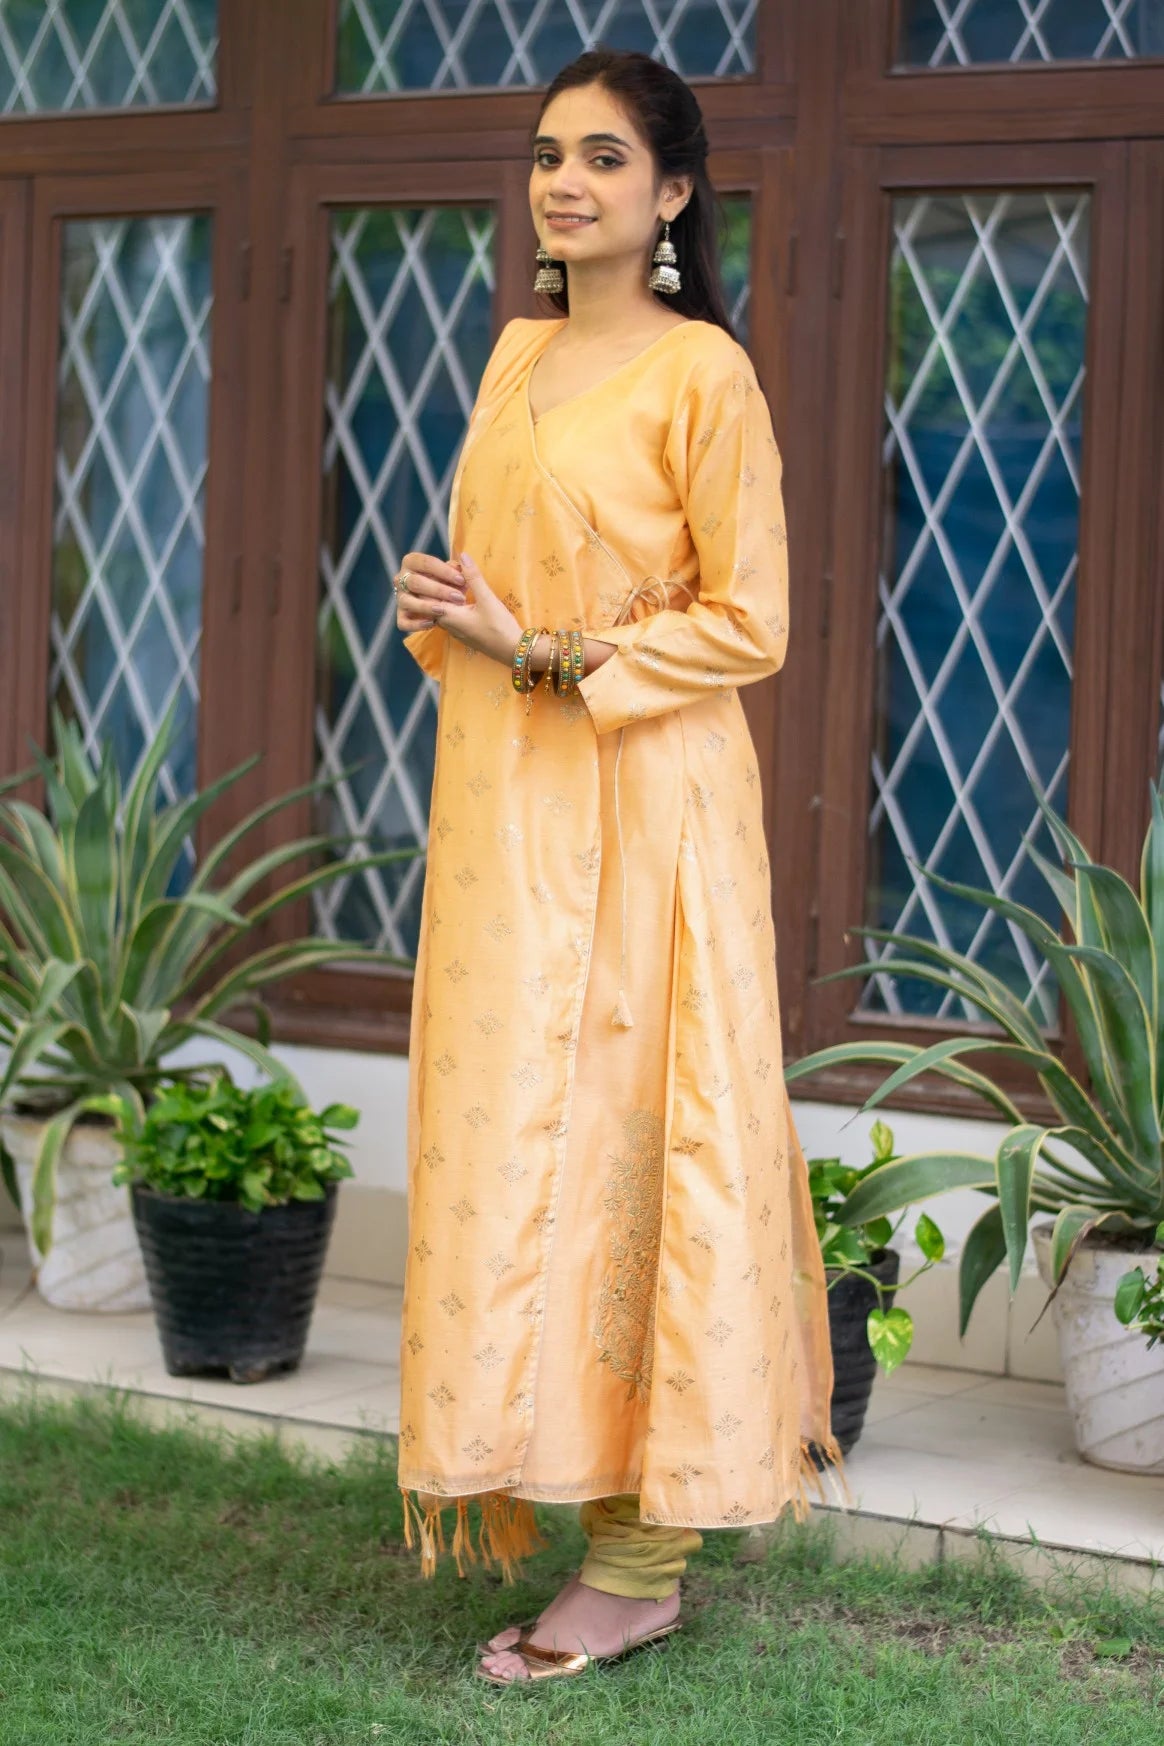 This peach angarkha kurta is a perfect blend of elegance and style, as worn by an Indian woman.